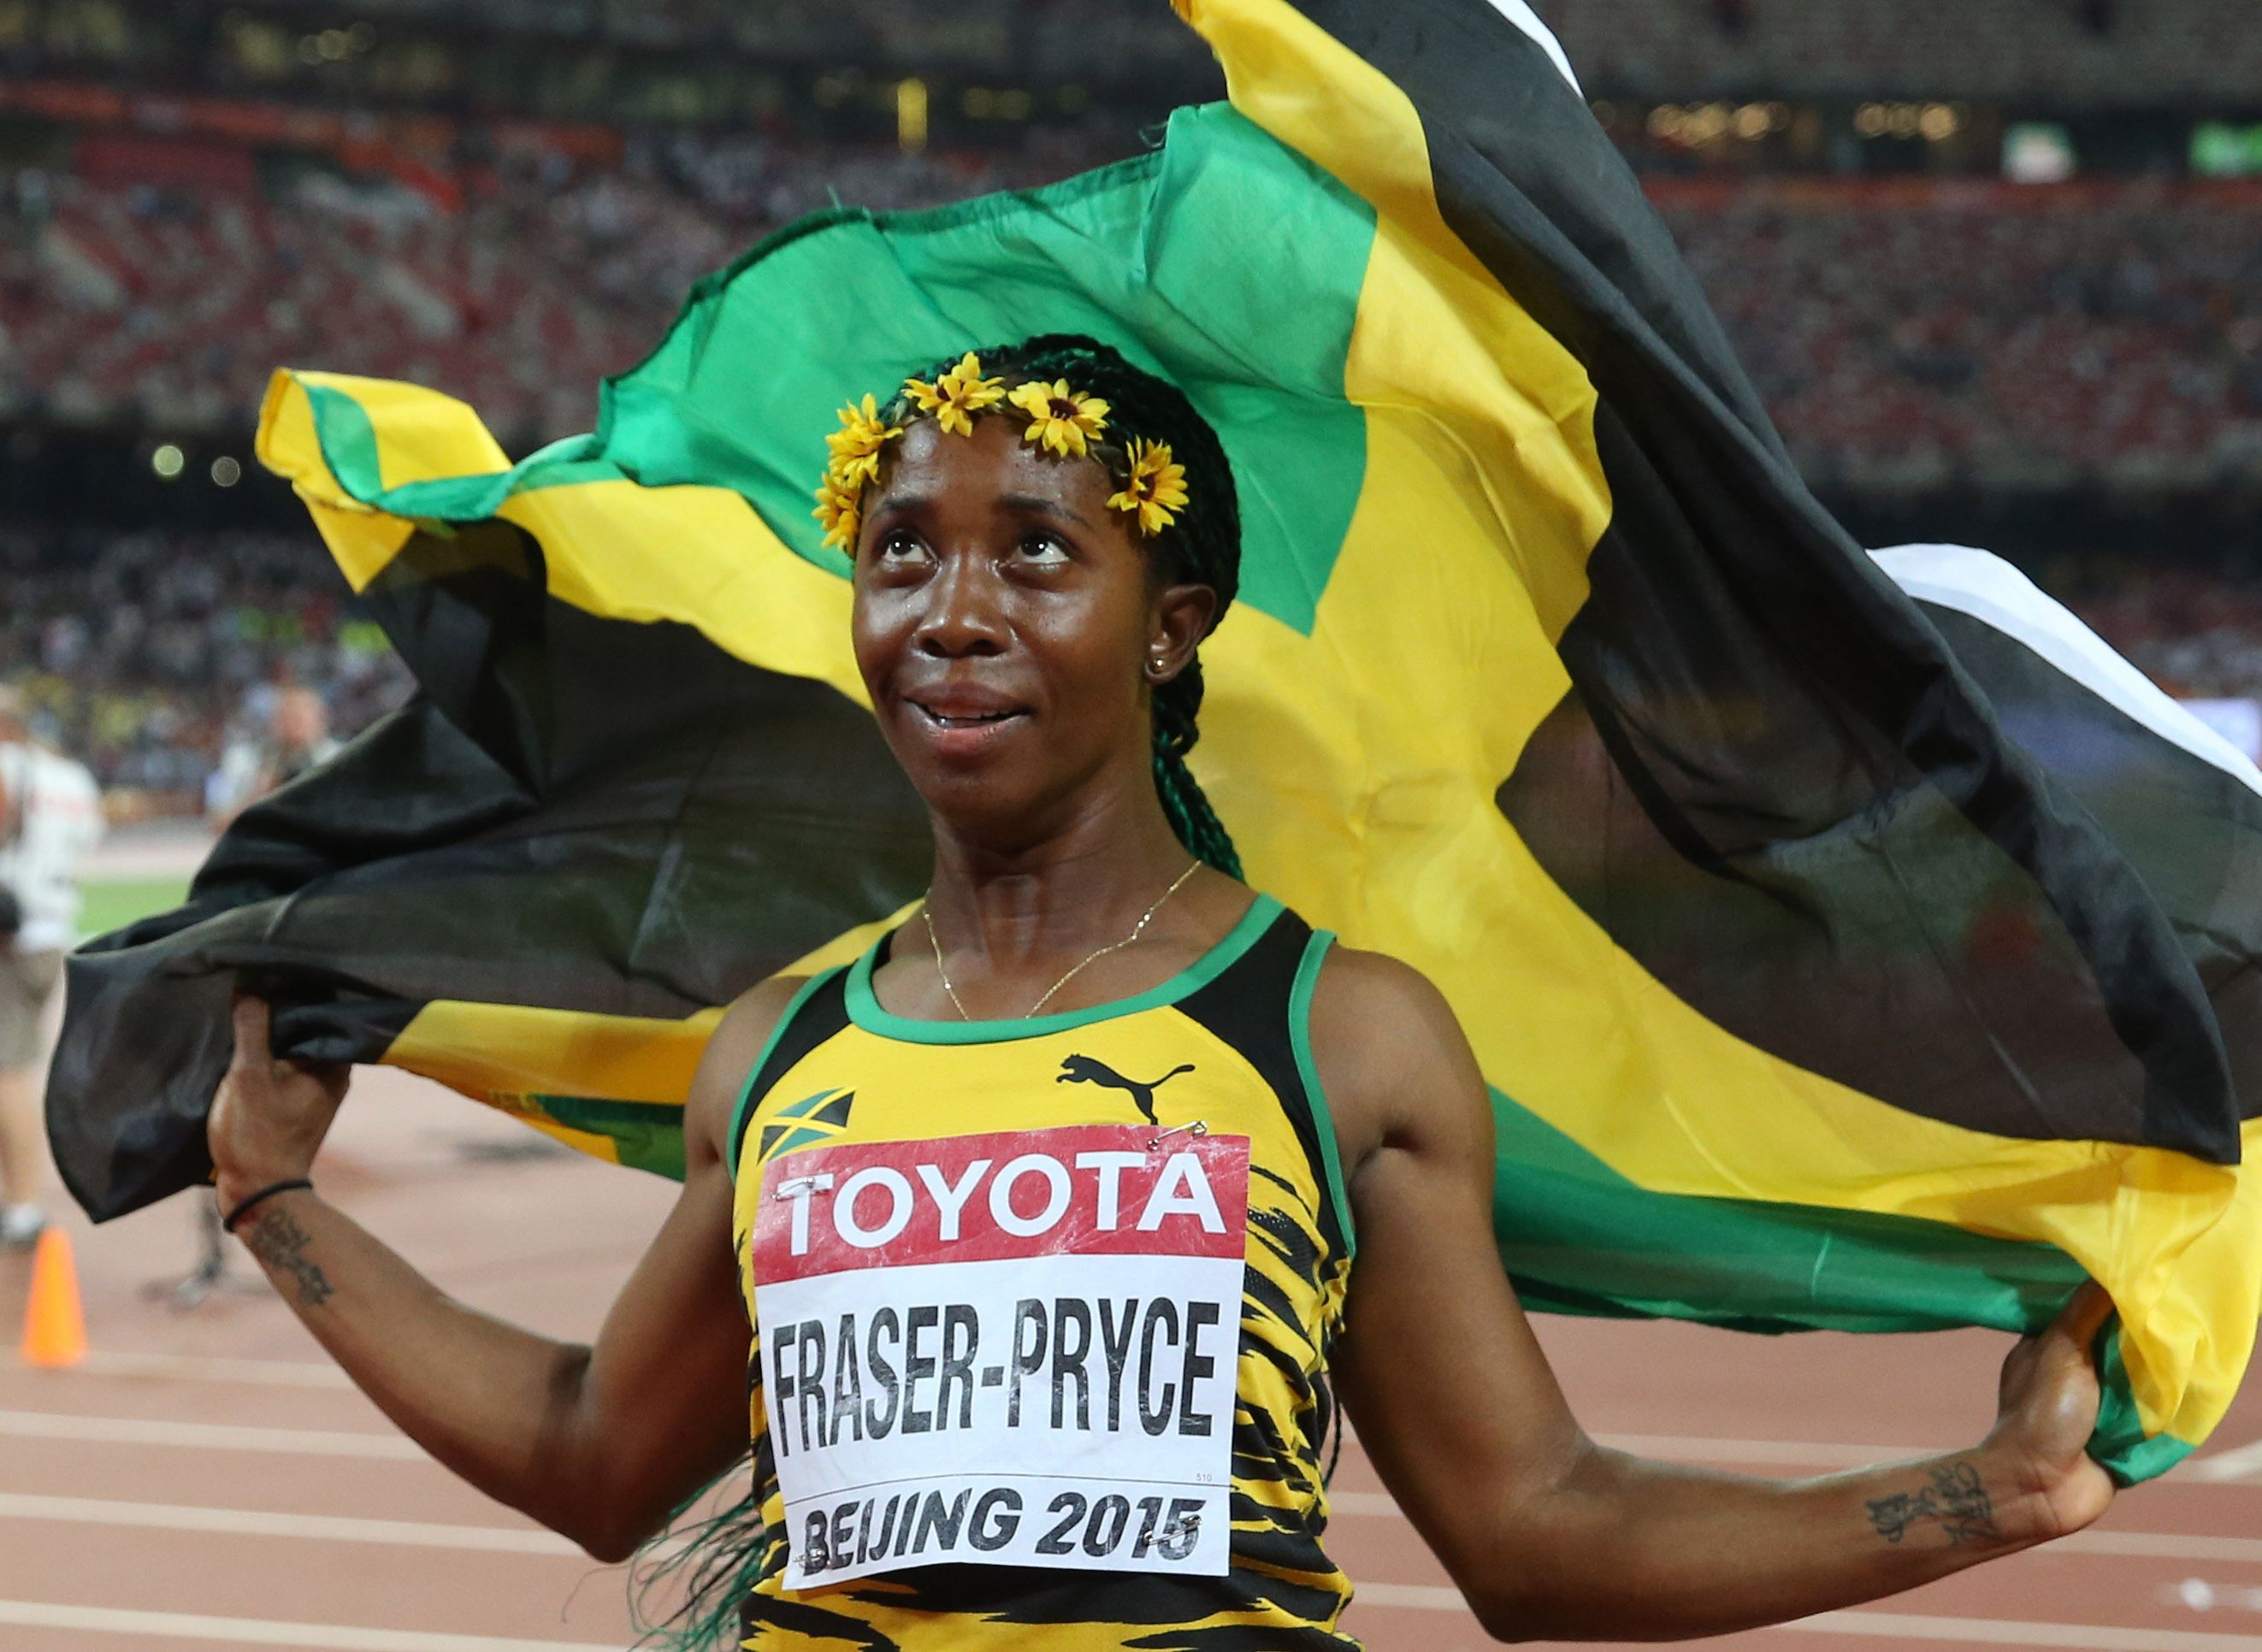 Jamaica's Shelly-Ann Fraser-Pryce celebrates after winning the women's 100 metres at the World Athletics Championships in Beijing. Photo: Xinhua